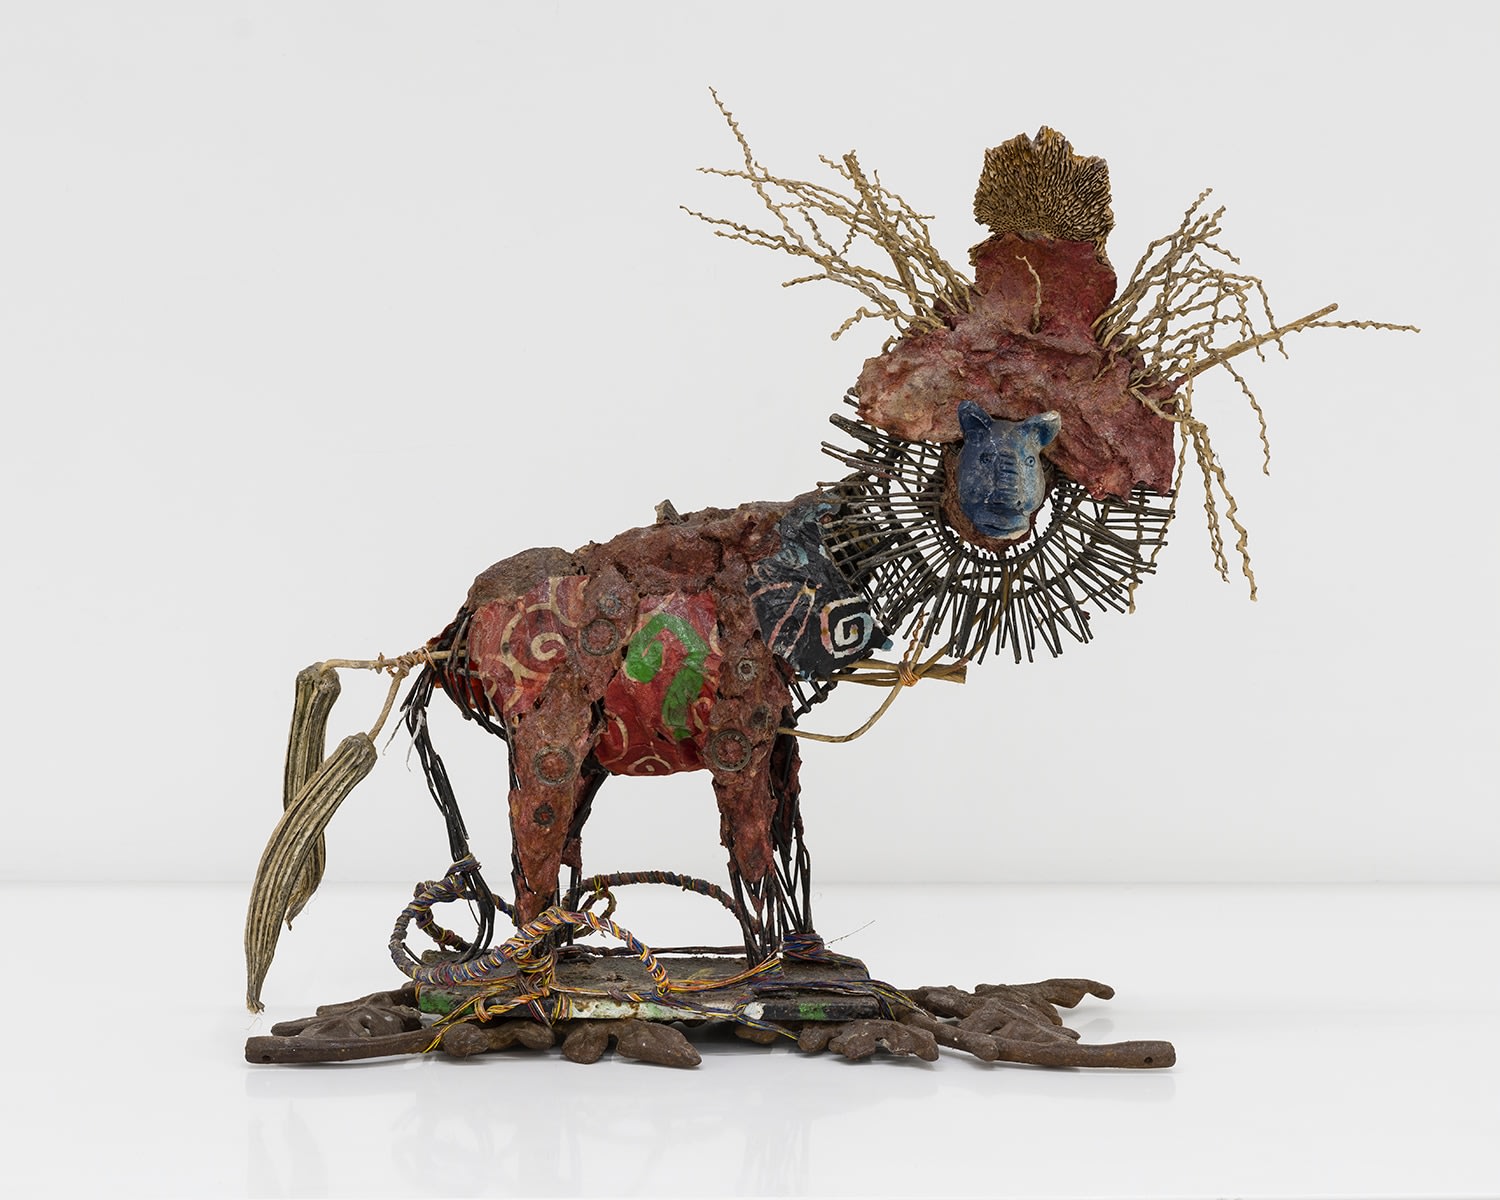 Teresa Tolliver, Untitled (Wild Things), 2003-2005, mixed media, 21 x 24 x 6 inches, courtesy Franklin Parrasch, New York.